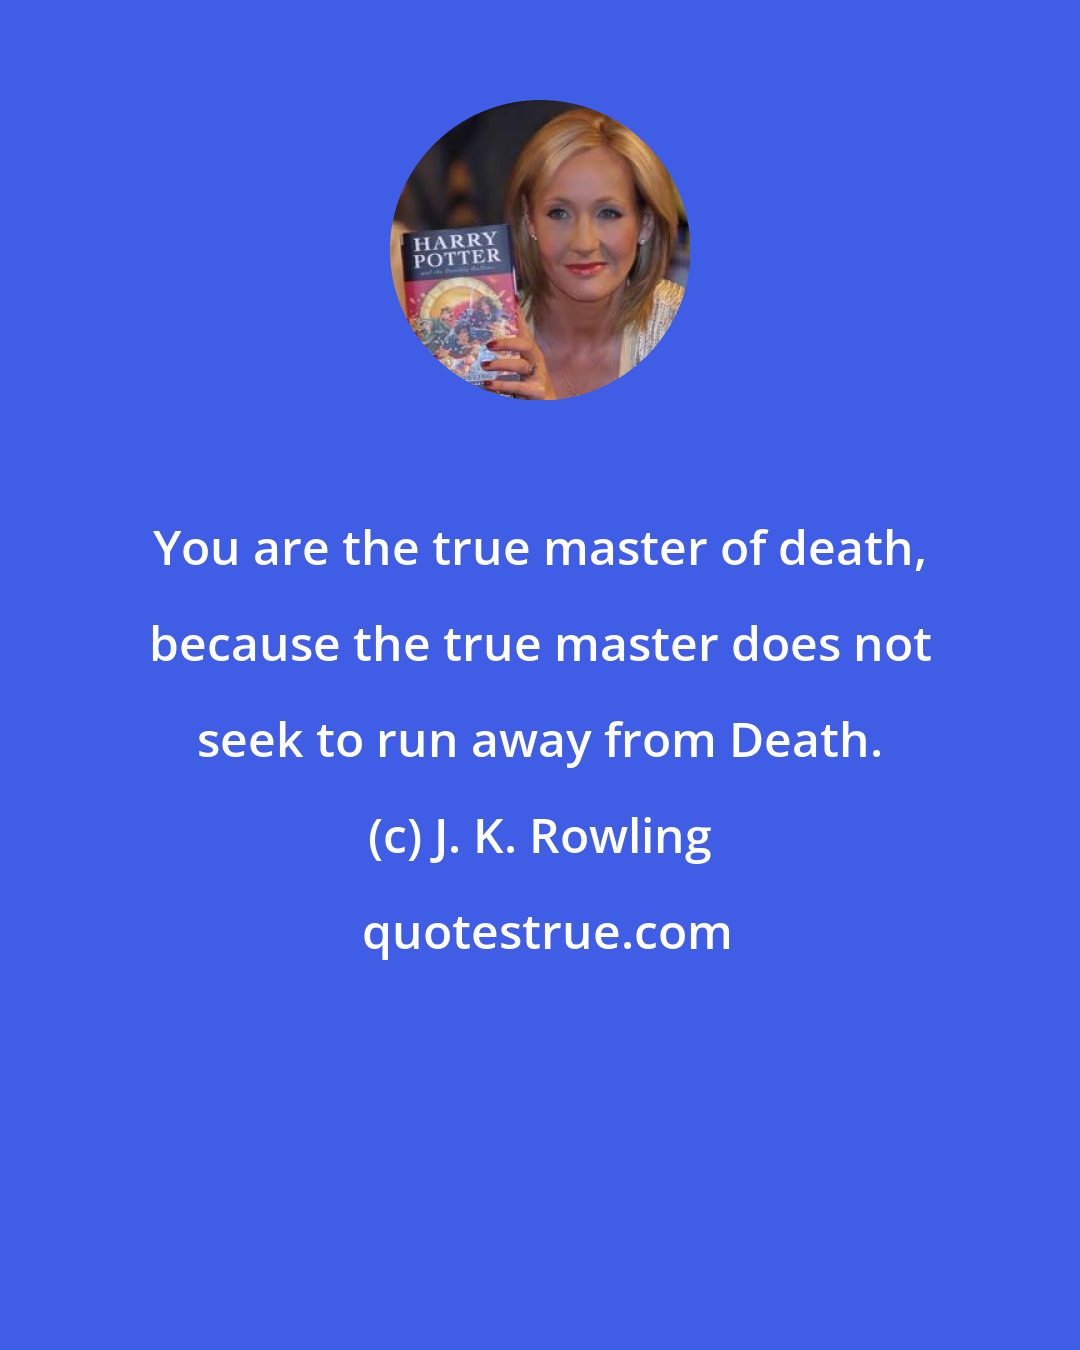 J. K. Rowling: You are the true master of death, because the true master does not seek to run away from Death.